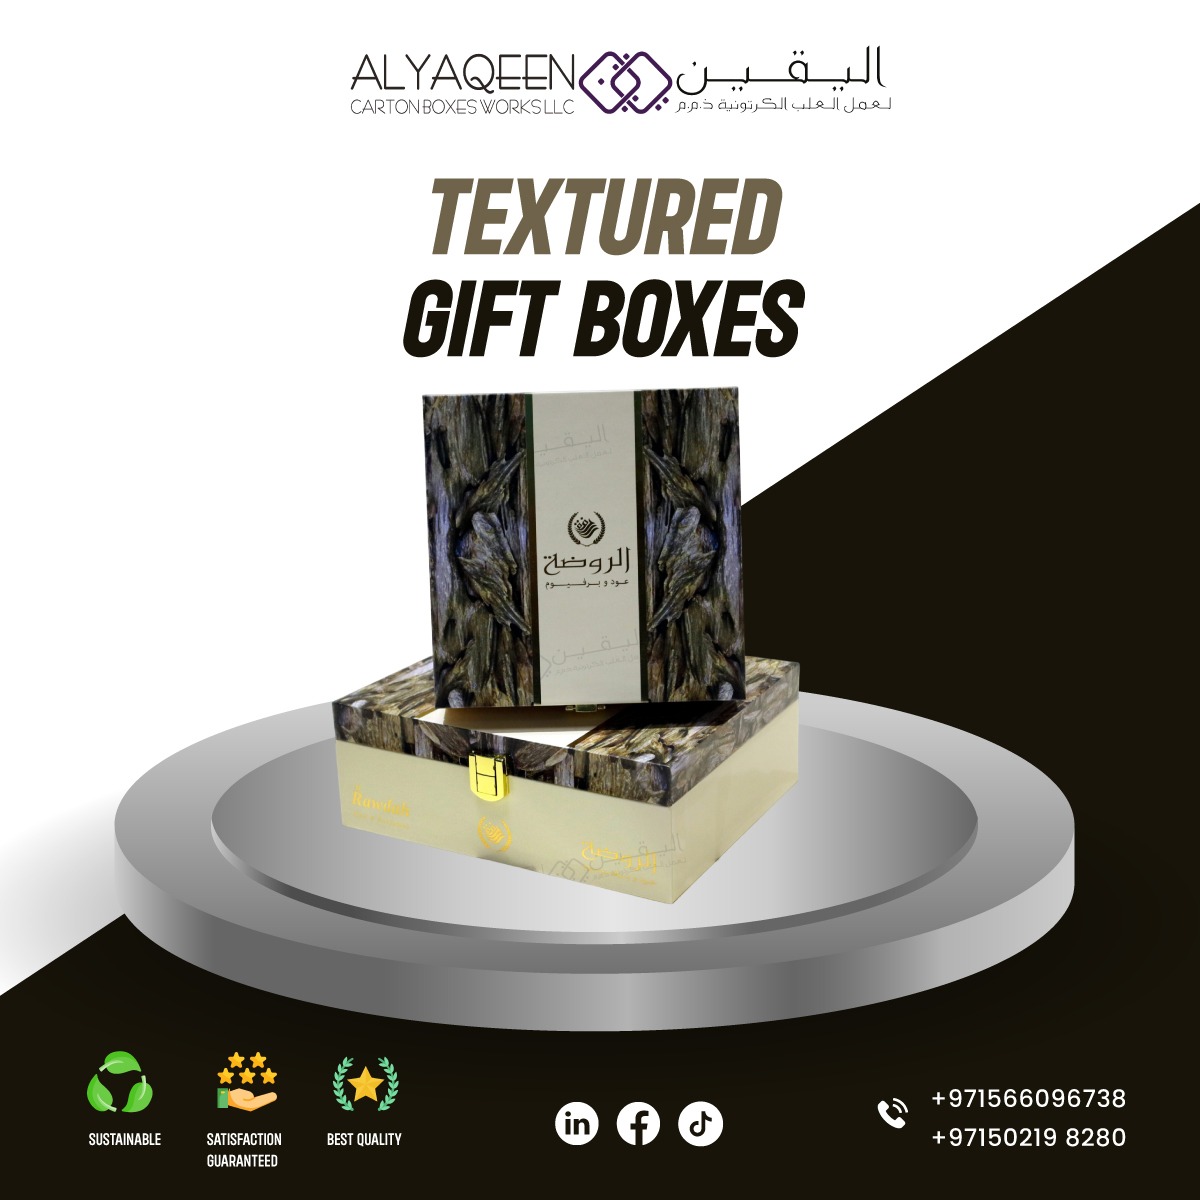 Wrap your gifts in luxury and style with our Textured Gift Boxes! 🎁✨ Whether it's a small token of appreciation or a grand gesture, these beautifully designed boxes are sure to make your presents stand out.#TexturedGiftBoxes #GiftsThatInspire #CelebrateInStyle